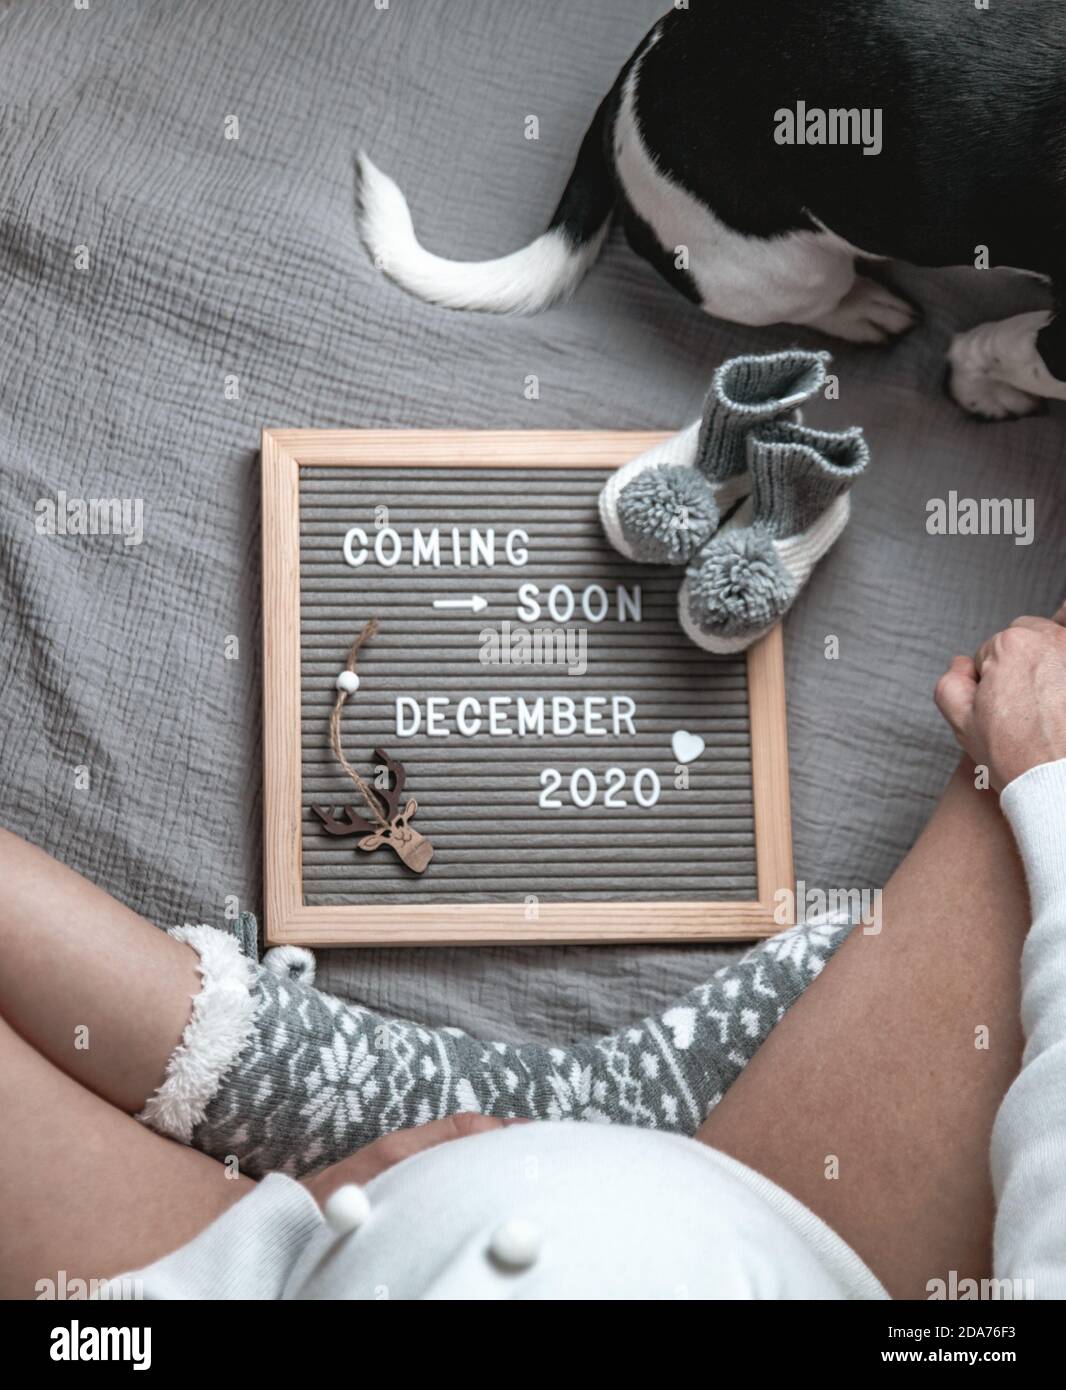 Pregnant woman sitting with a coming soon December 2020 Baby announcement sign and puppy in backgroun. Coming soon Christmas concept. Pregnancy belly. Stock Photo